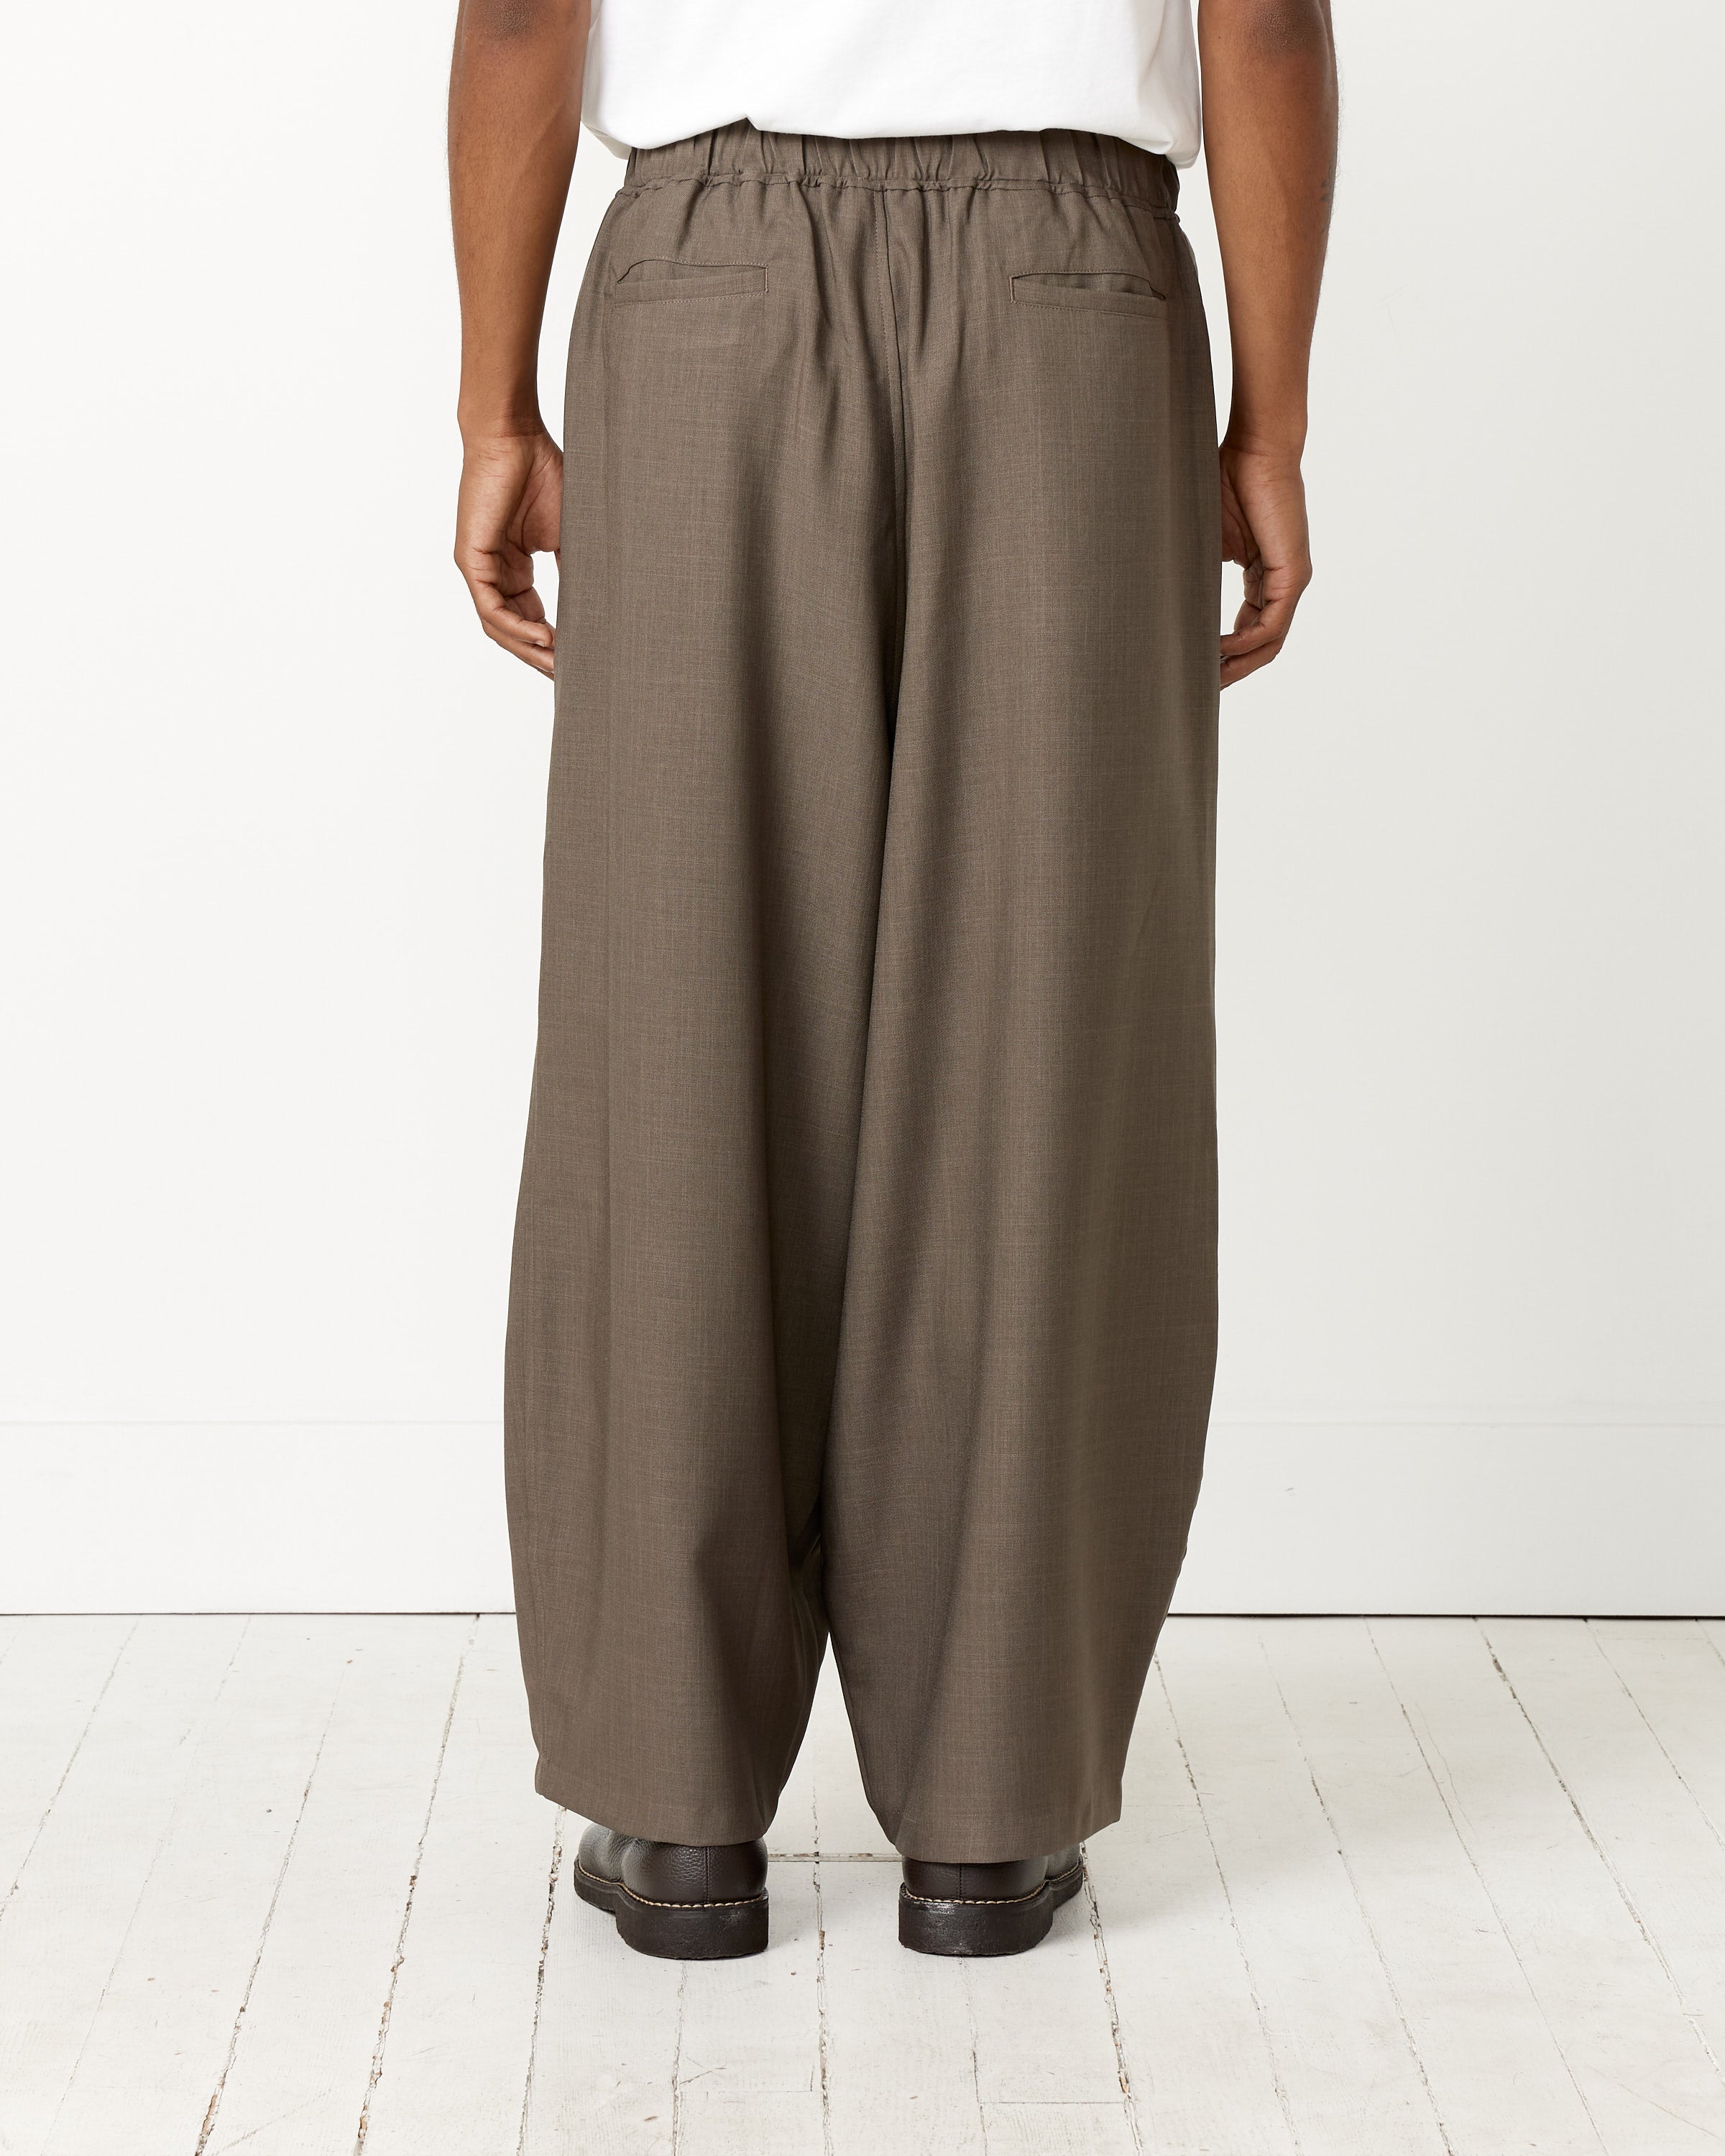 LawPro Polyester Twill Uniform Trousers.